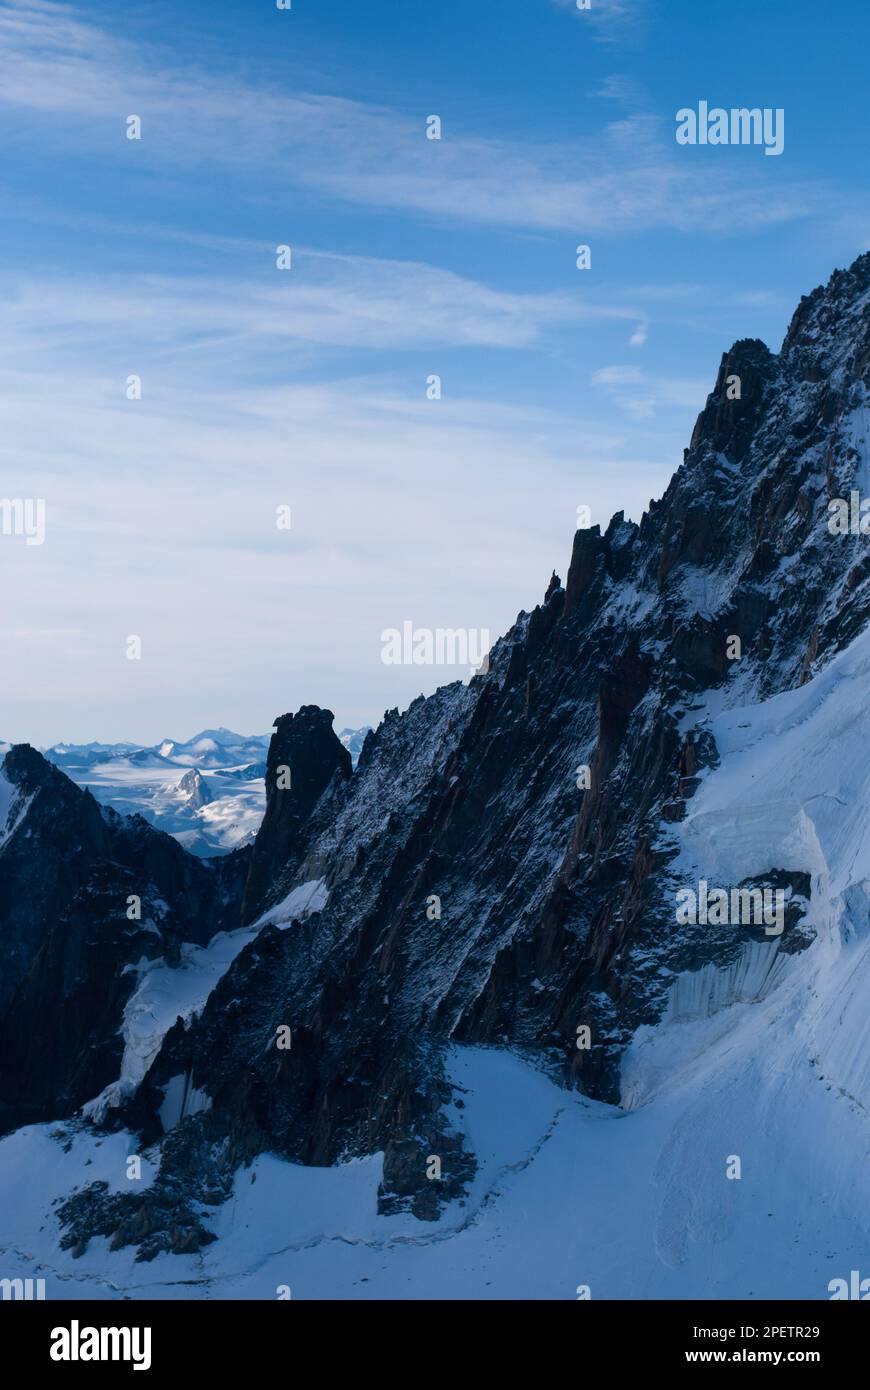 View on mountain top with snow in Alps Stock Photo